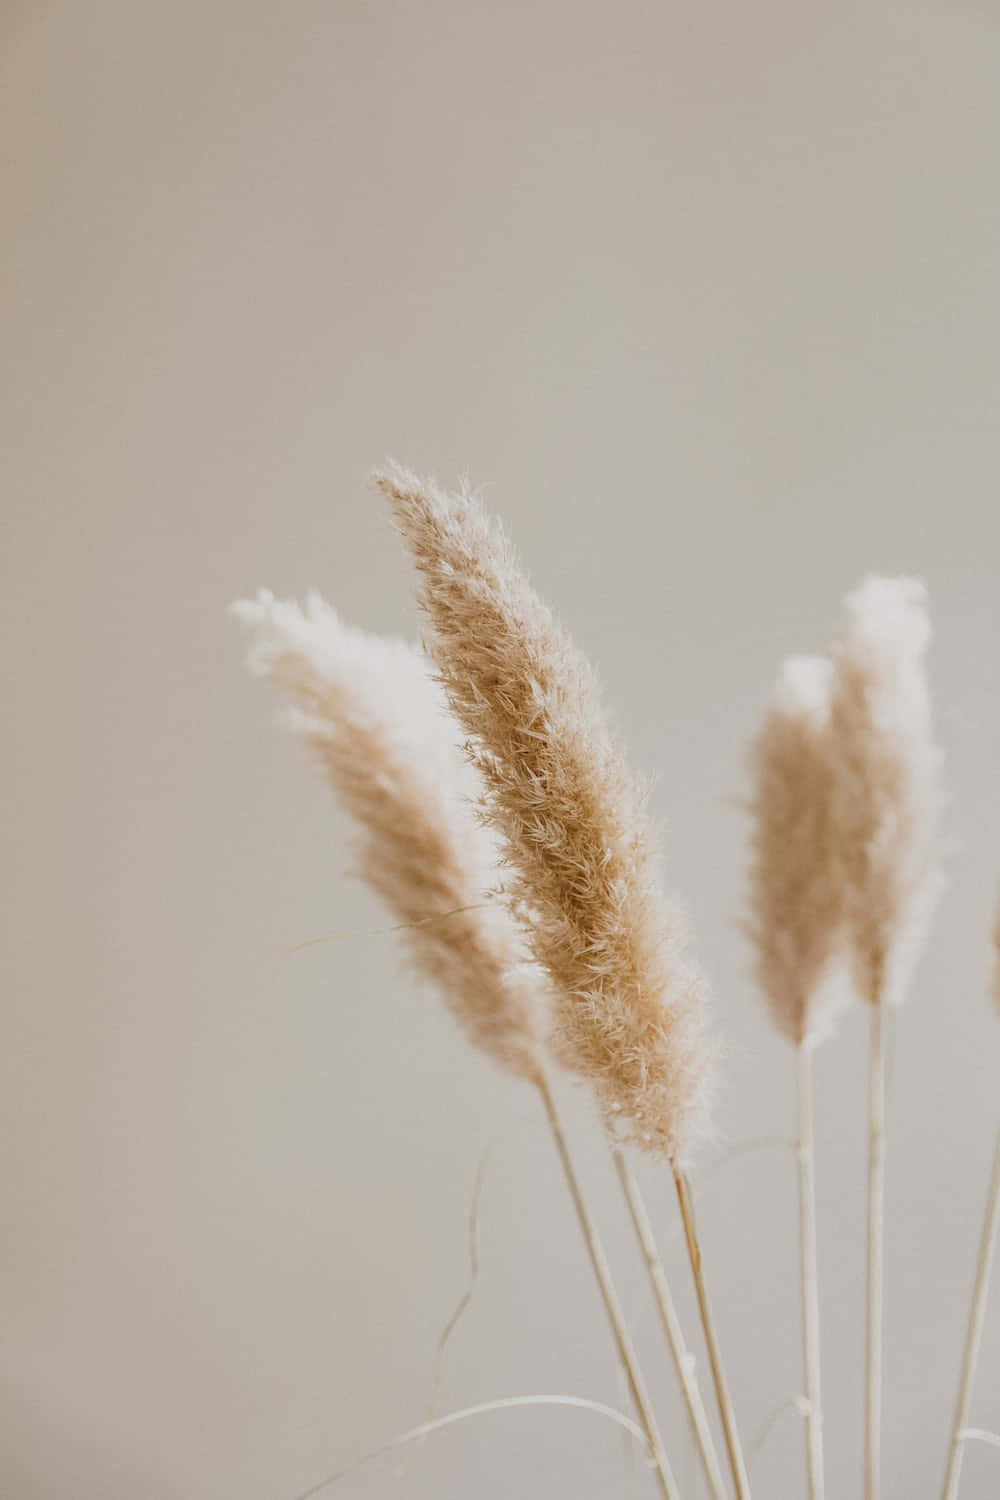 A Vase Of Dried Grasses Against A Beige Background